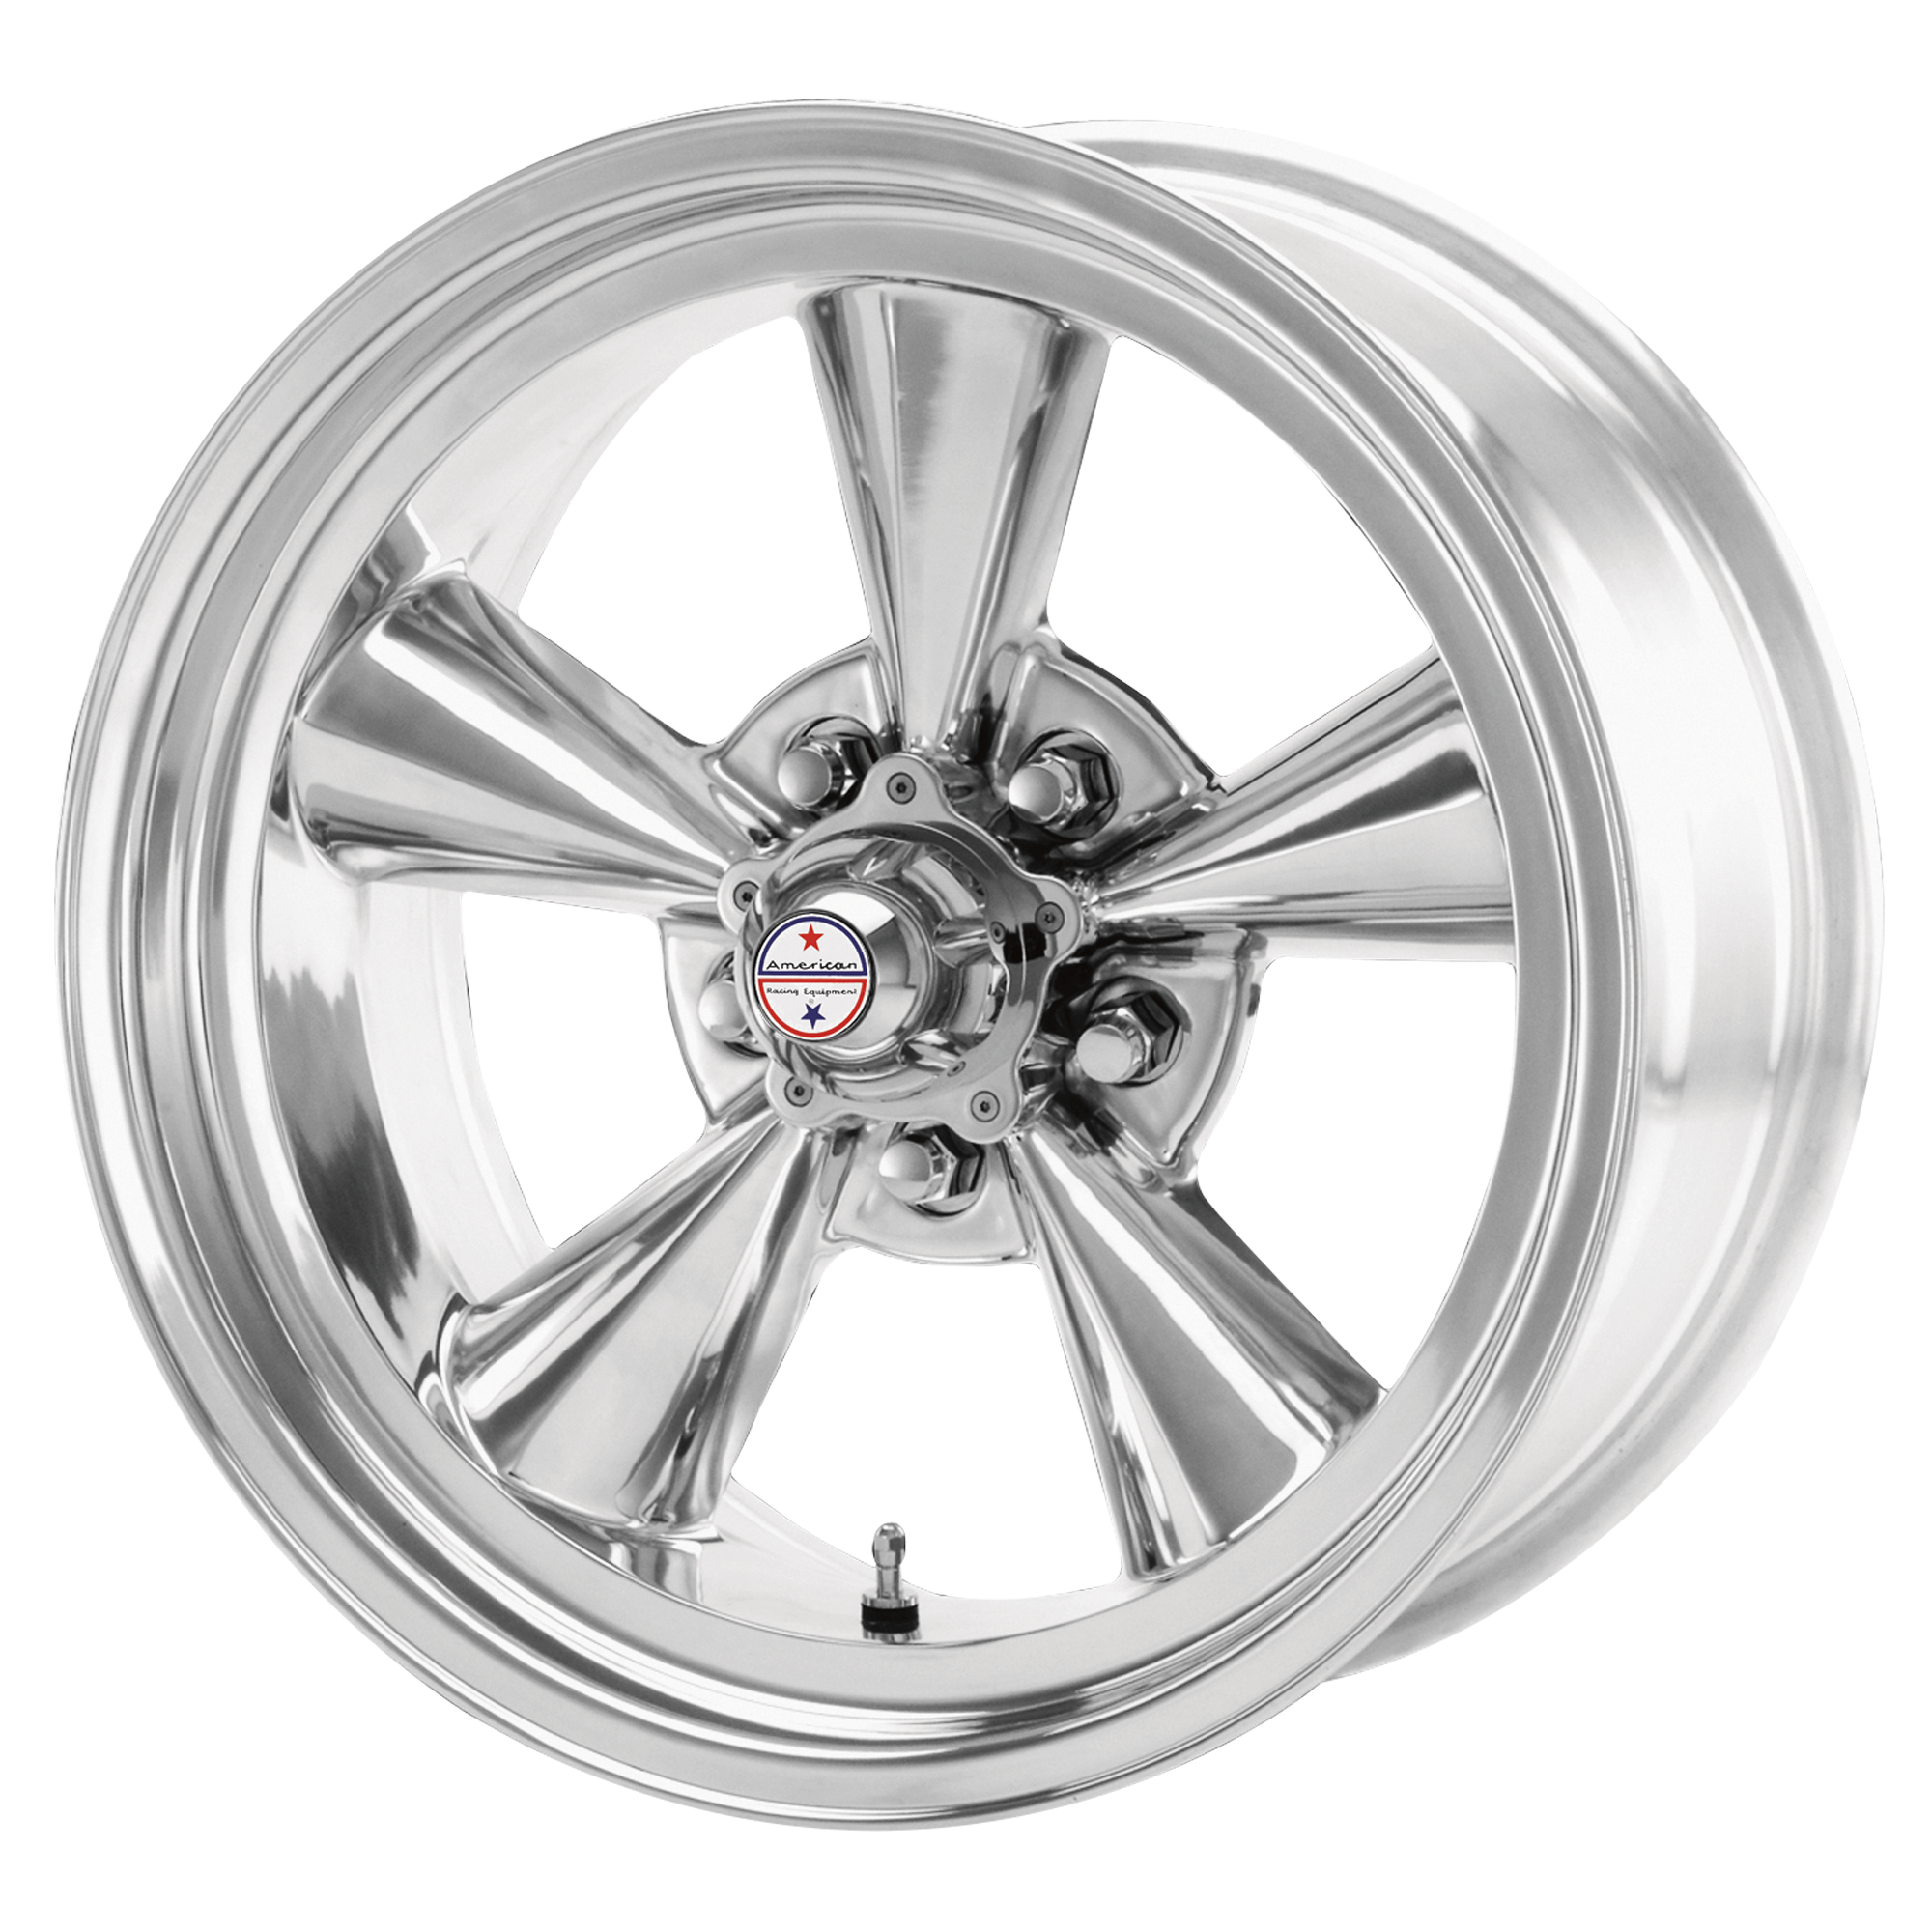 TT O 15x8.5 5x120.65 POLISHED (-24 mm) - Tires and Engine Performance